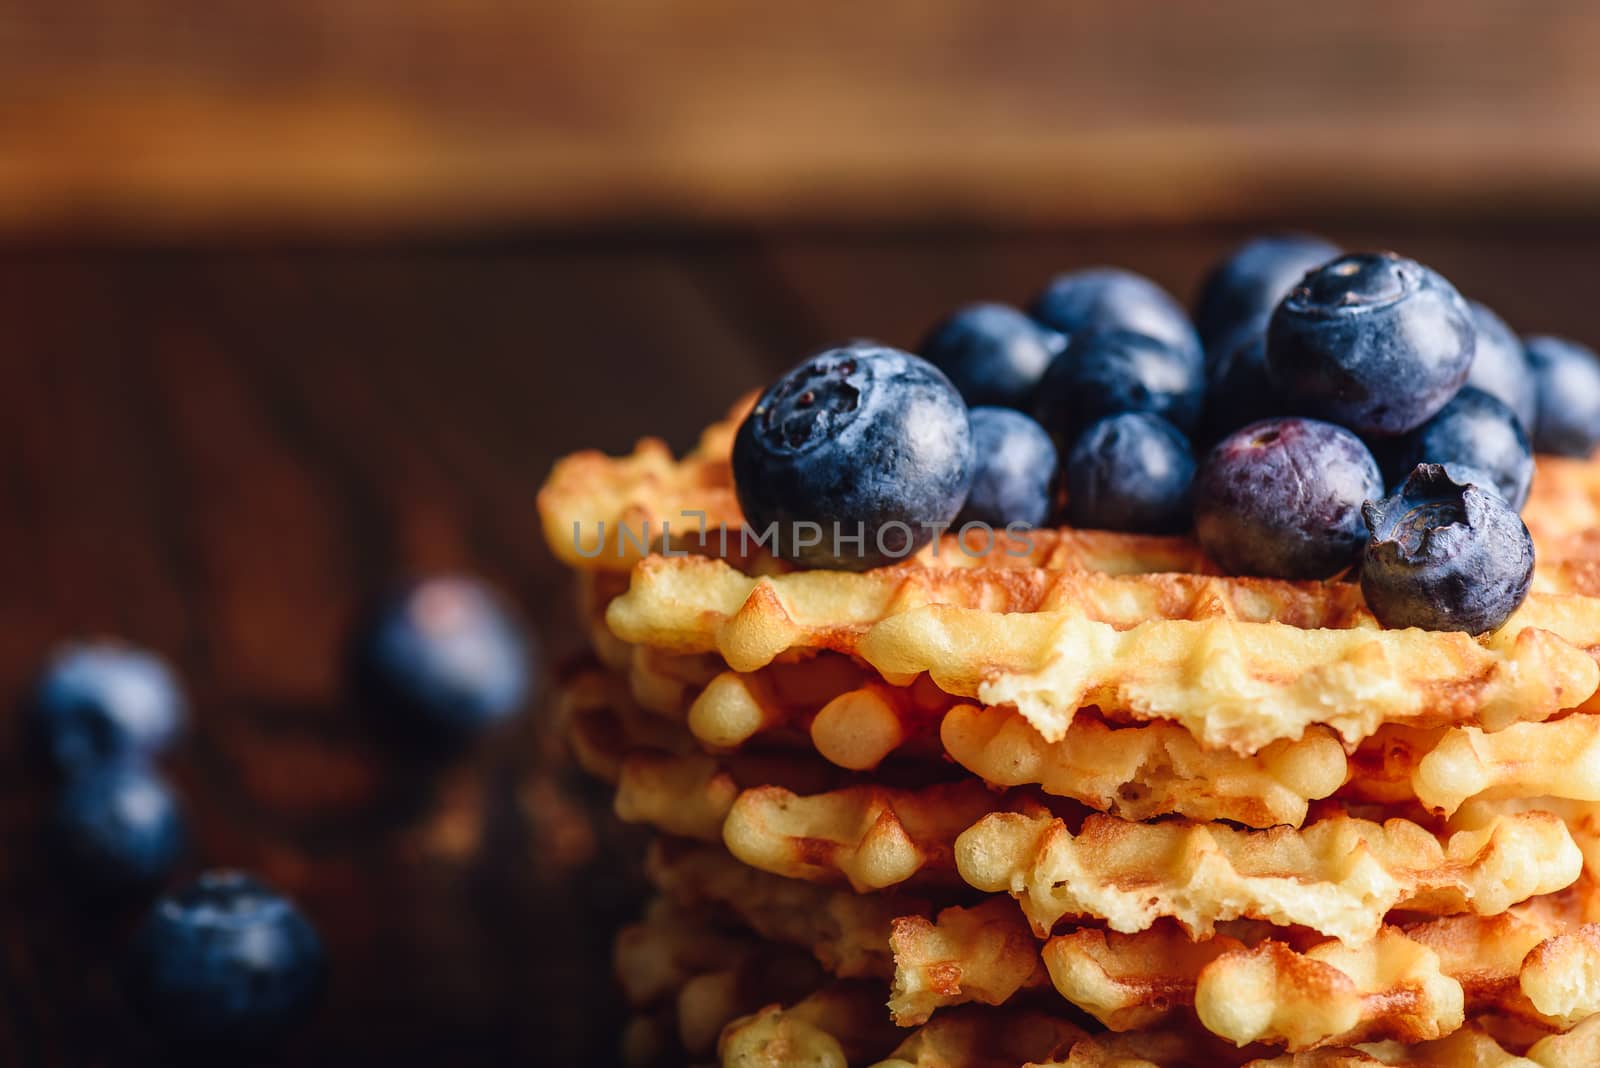 Blueberries on the Top of the Waffles Stack and Other Scattered on Wooden Background.